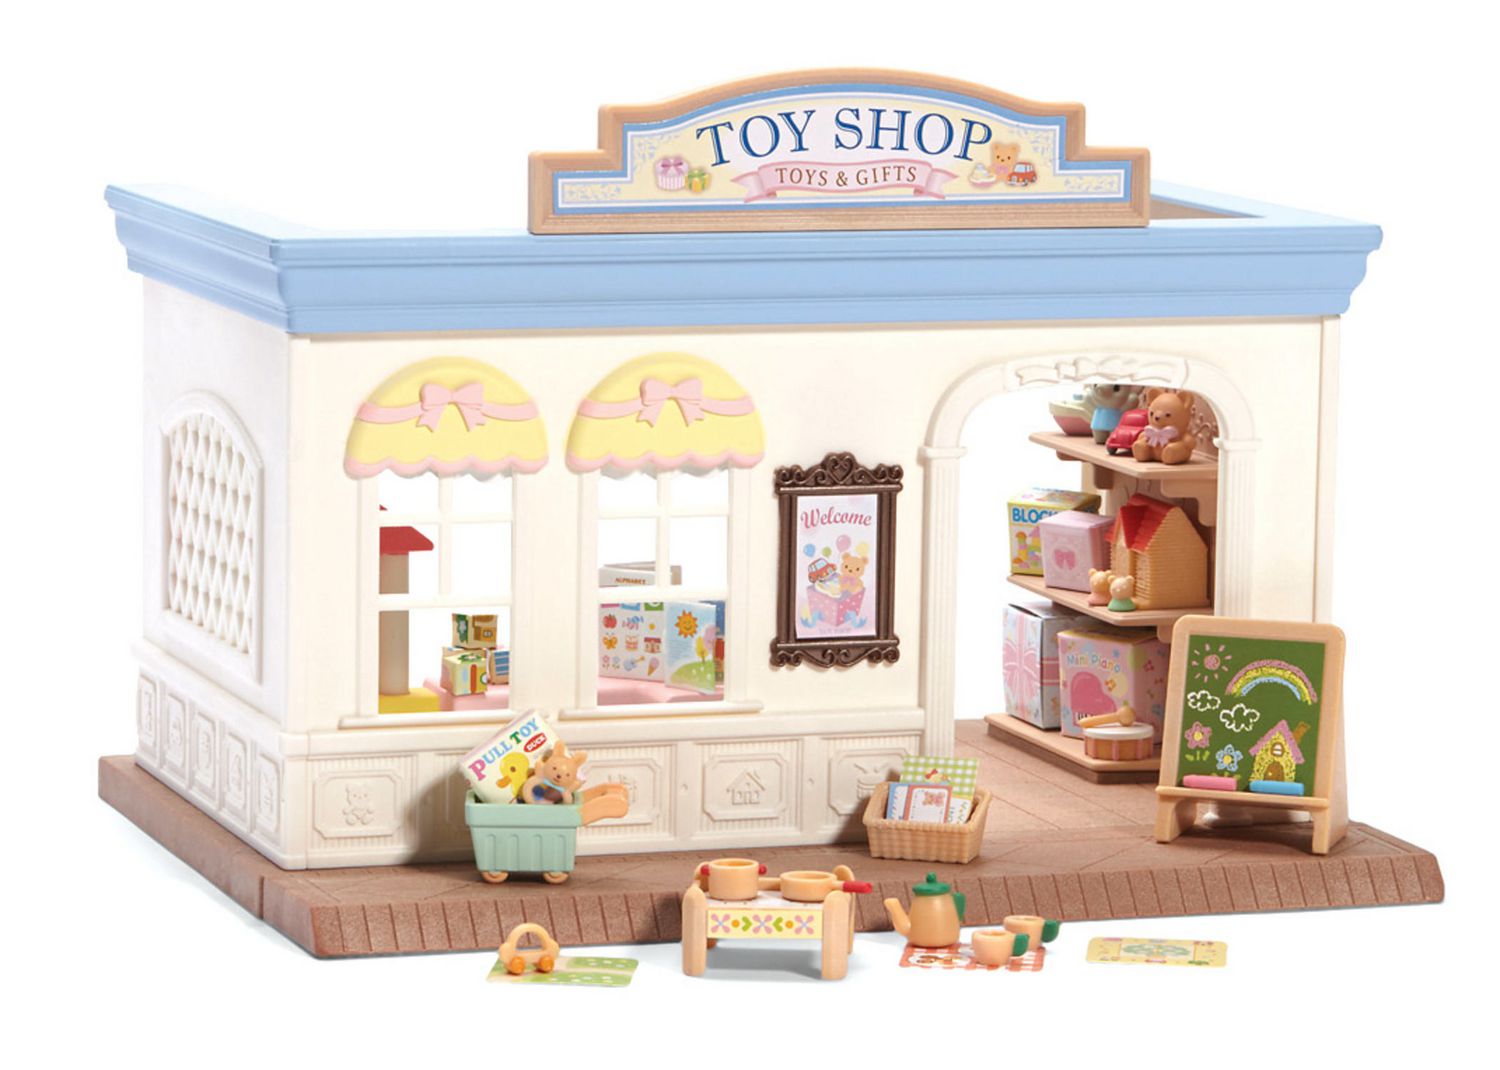 calico critters play table